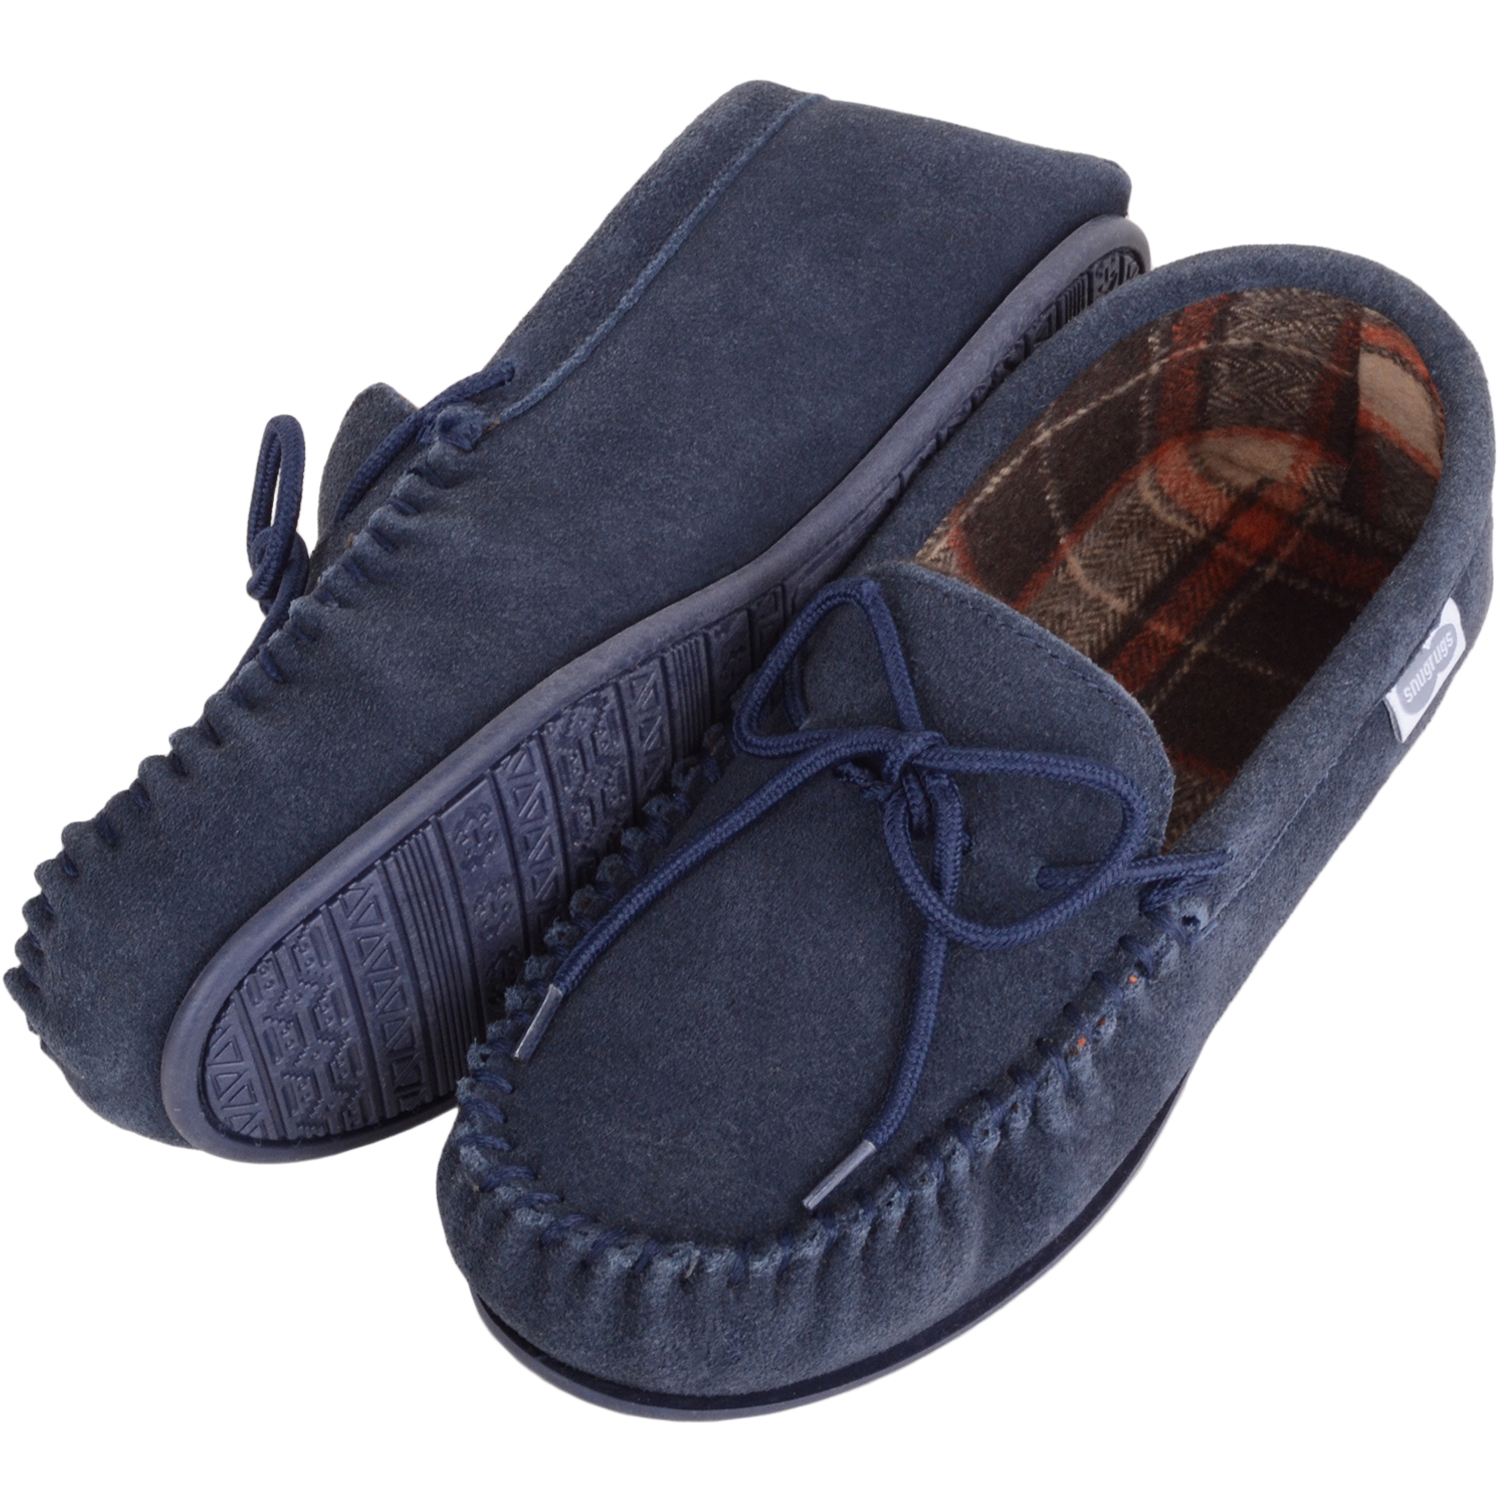 Men's Suede Moccasin Slipper - Soft Step - Cotton Lining - Snugrugs